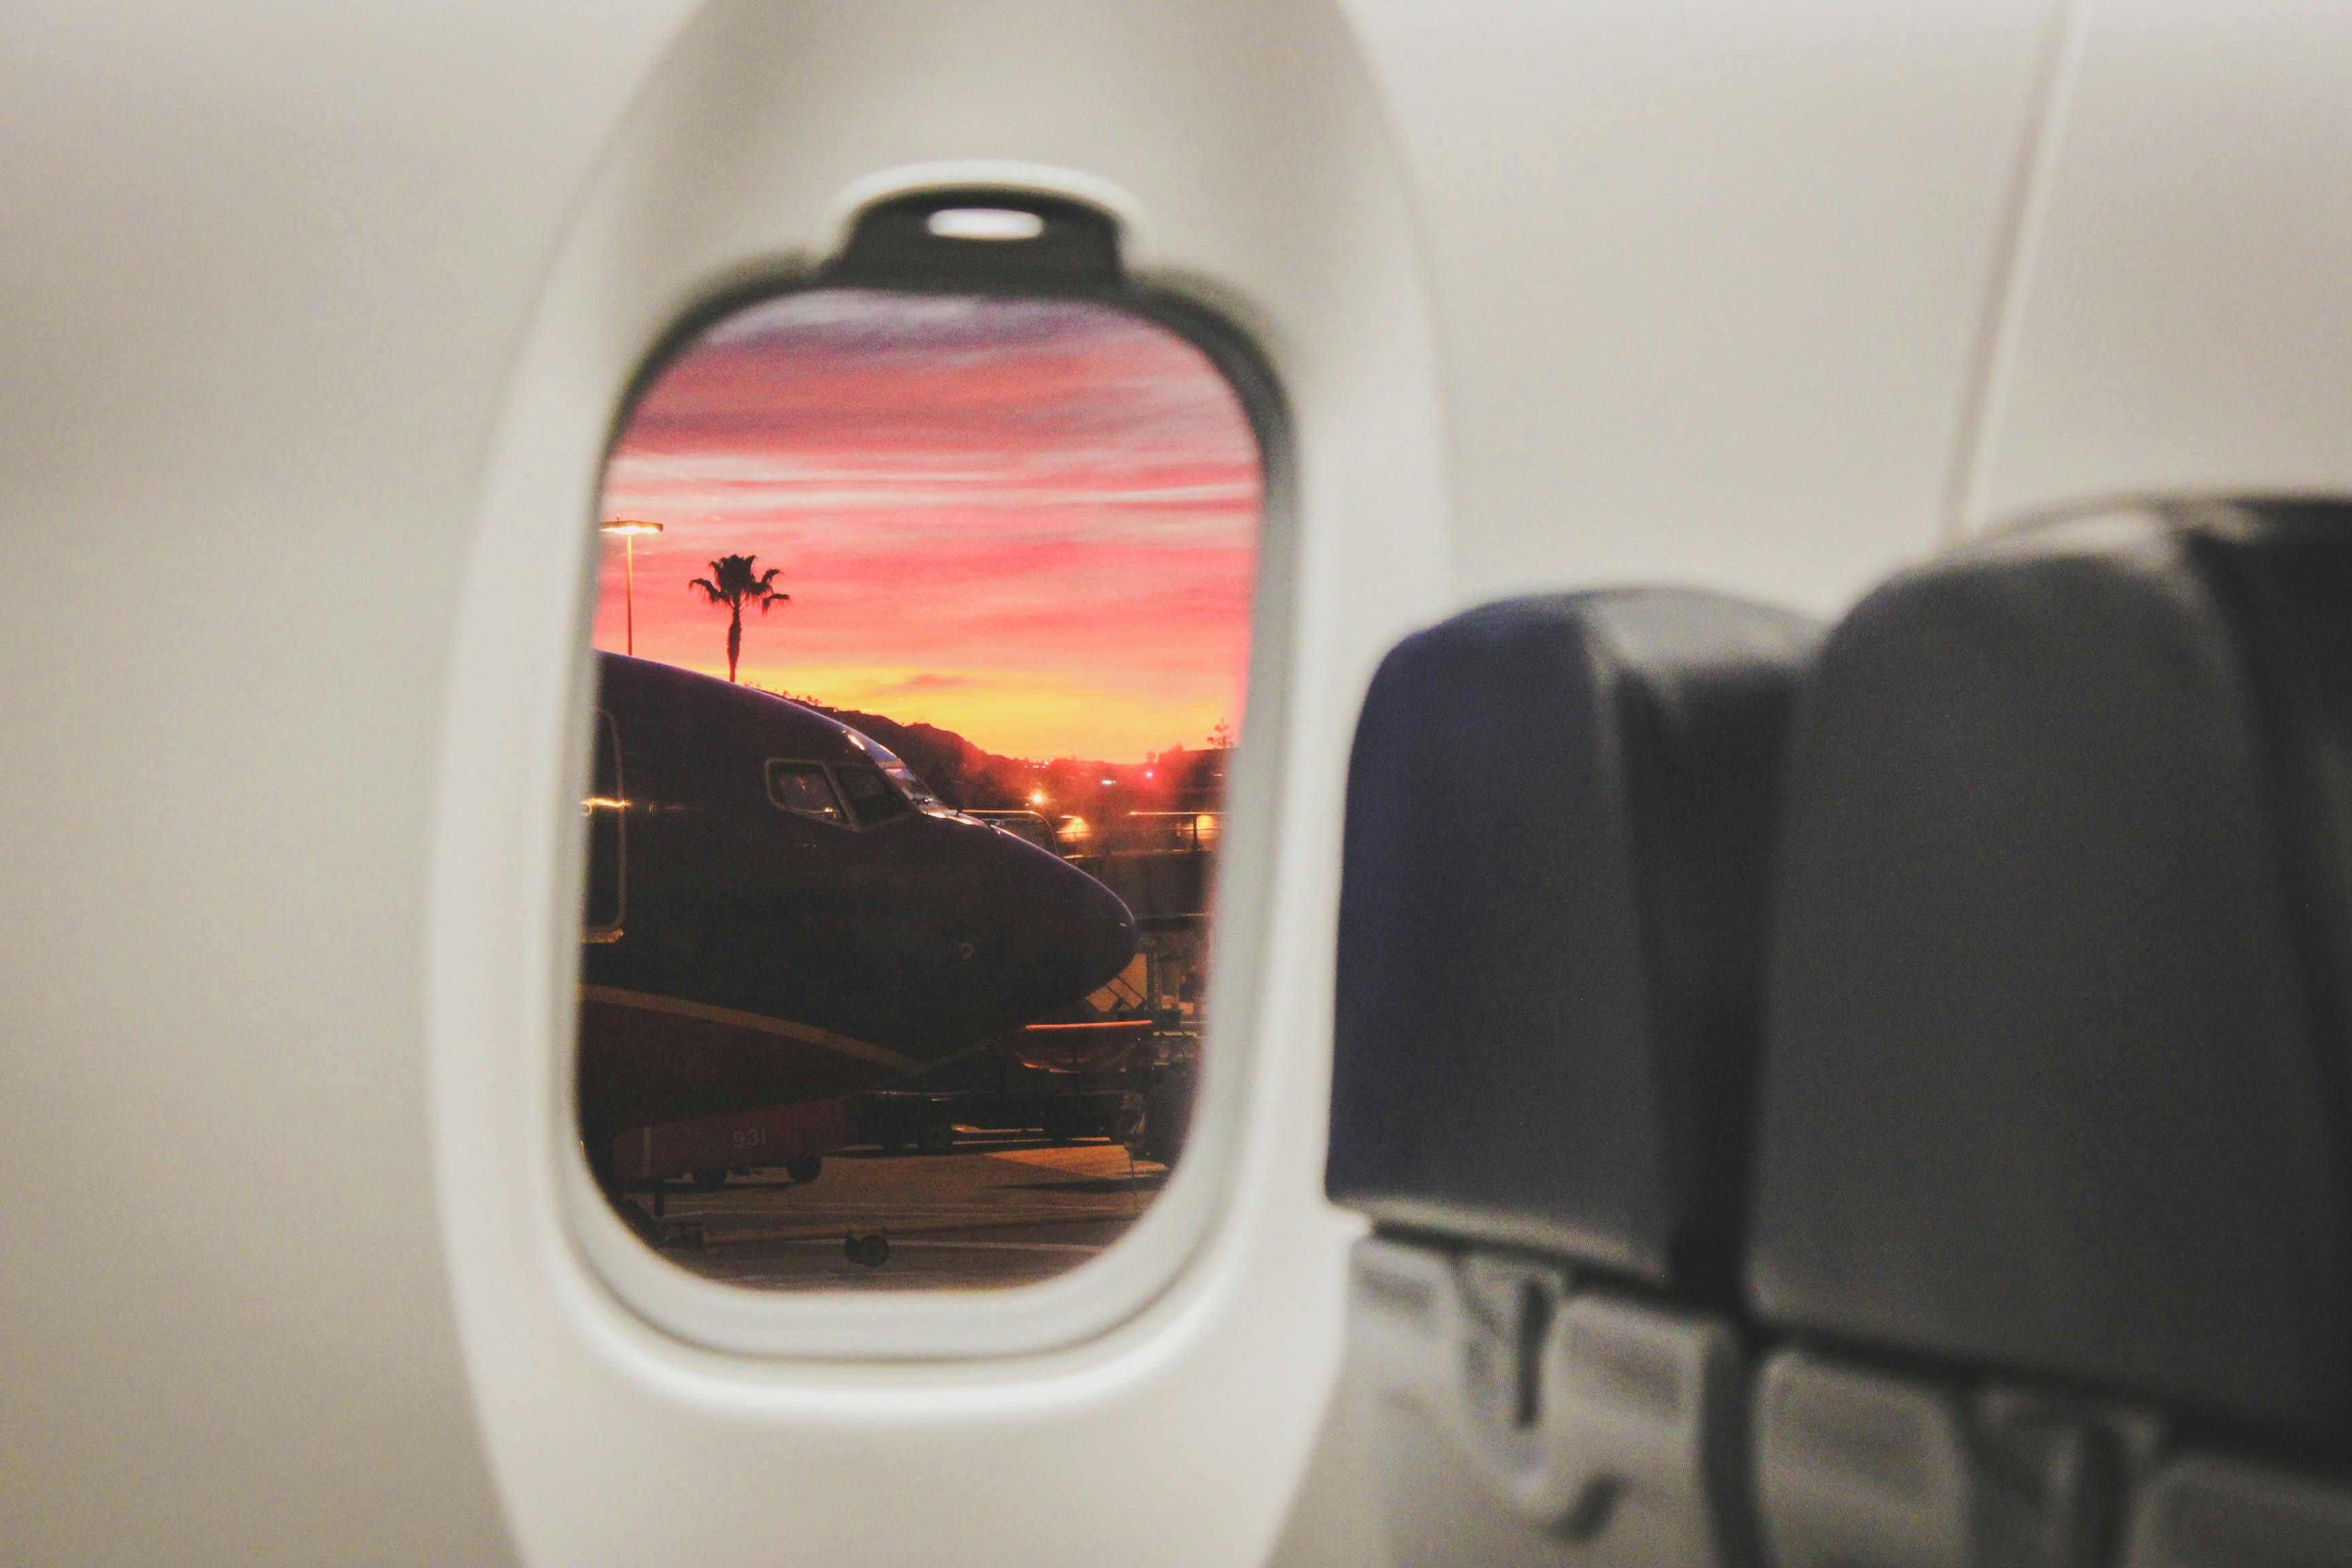 Airplane window looking out to sunset and palm trees